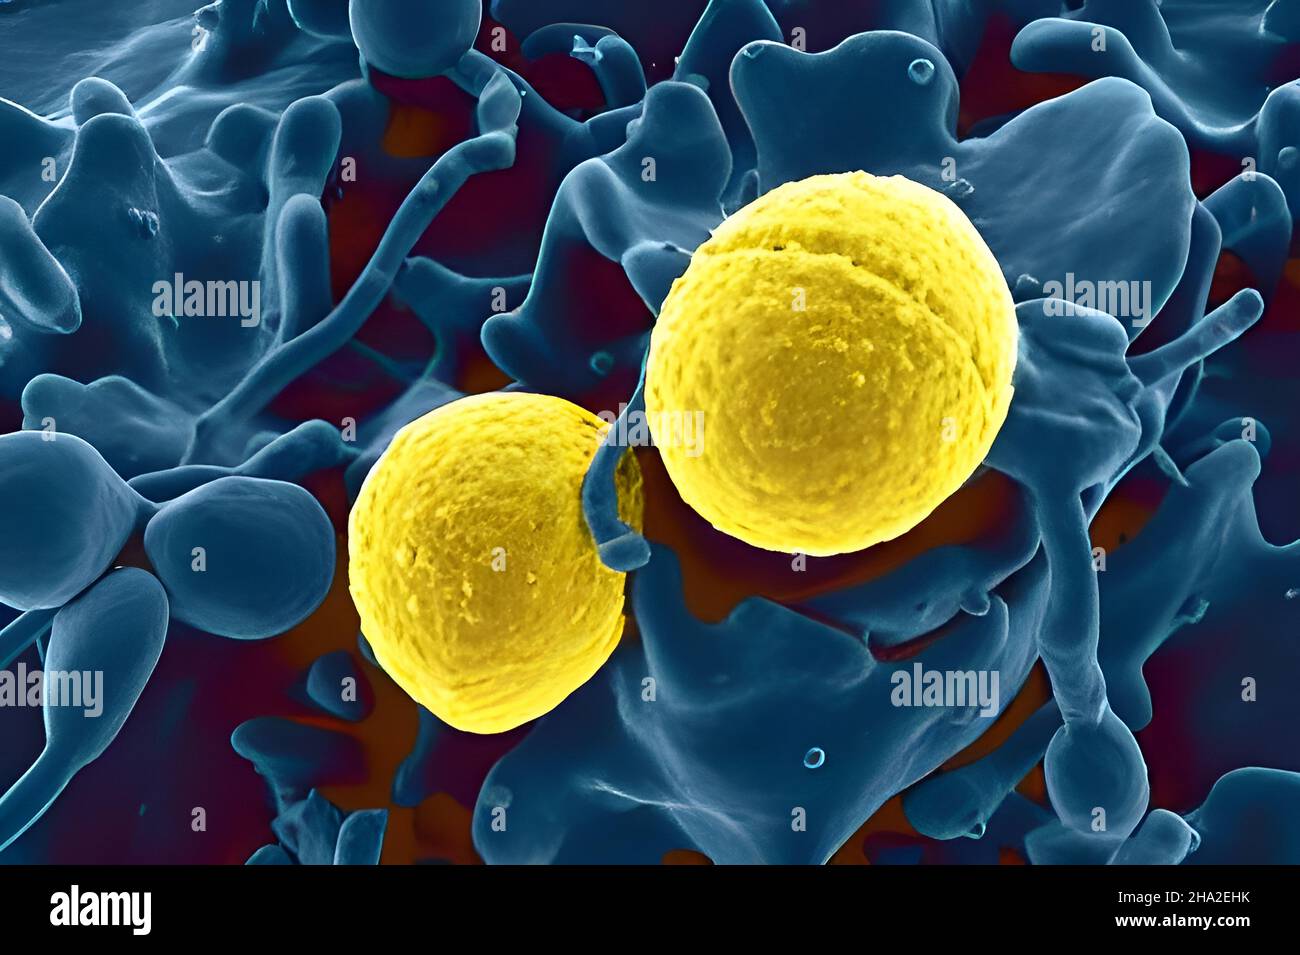 7,848 Staphylococcus Images, Stock Photos, 3D objects, & Vectors